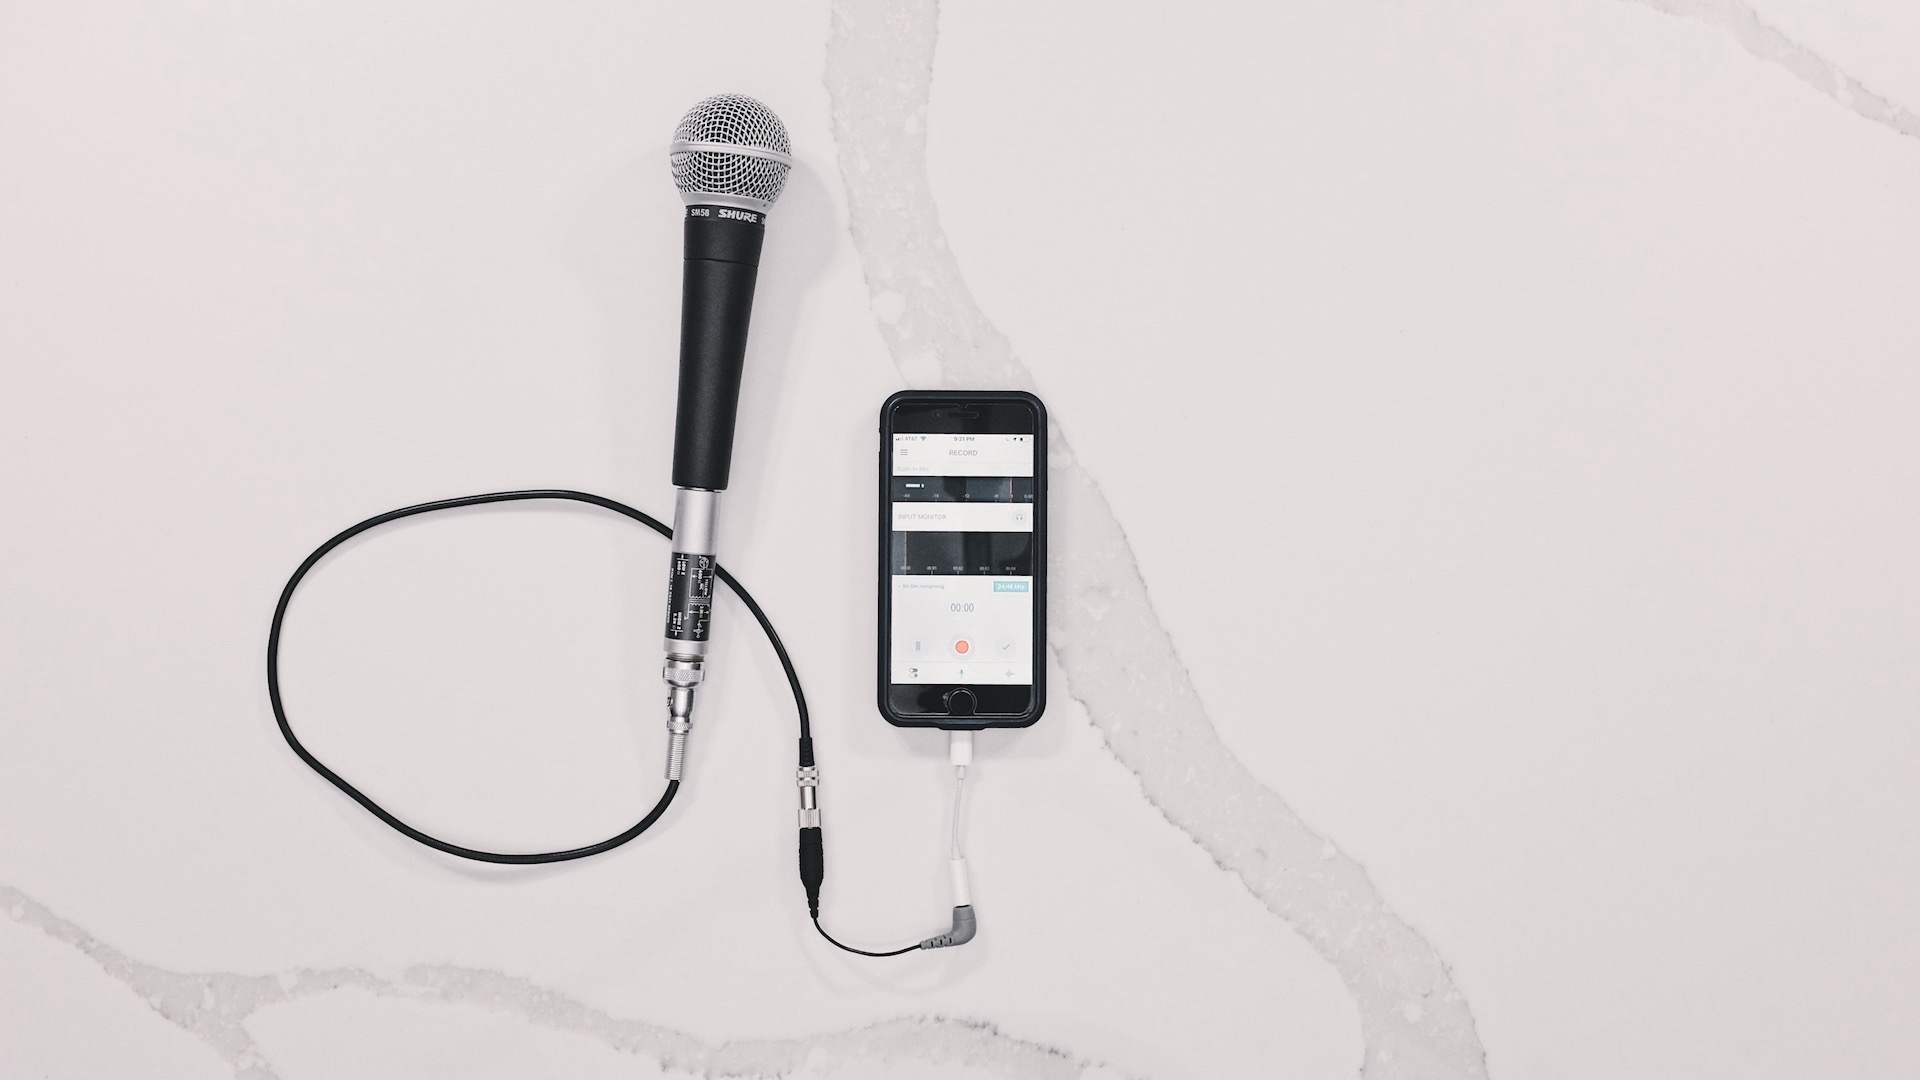 How To Record Professional Audio On An Iphone With An External Microphone Mediashi